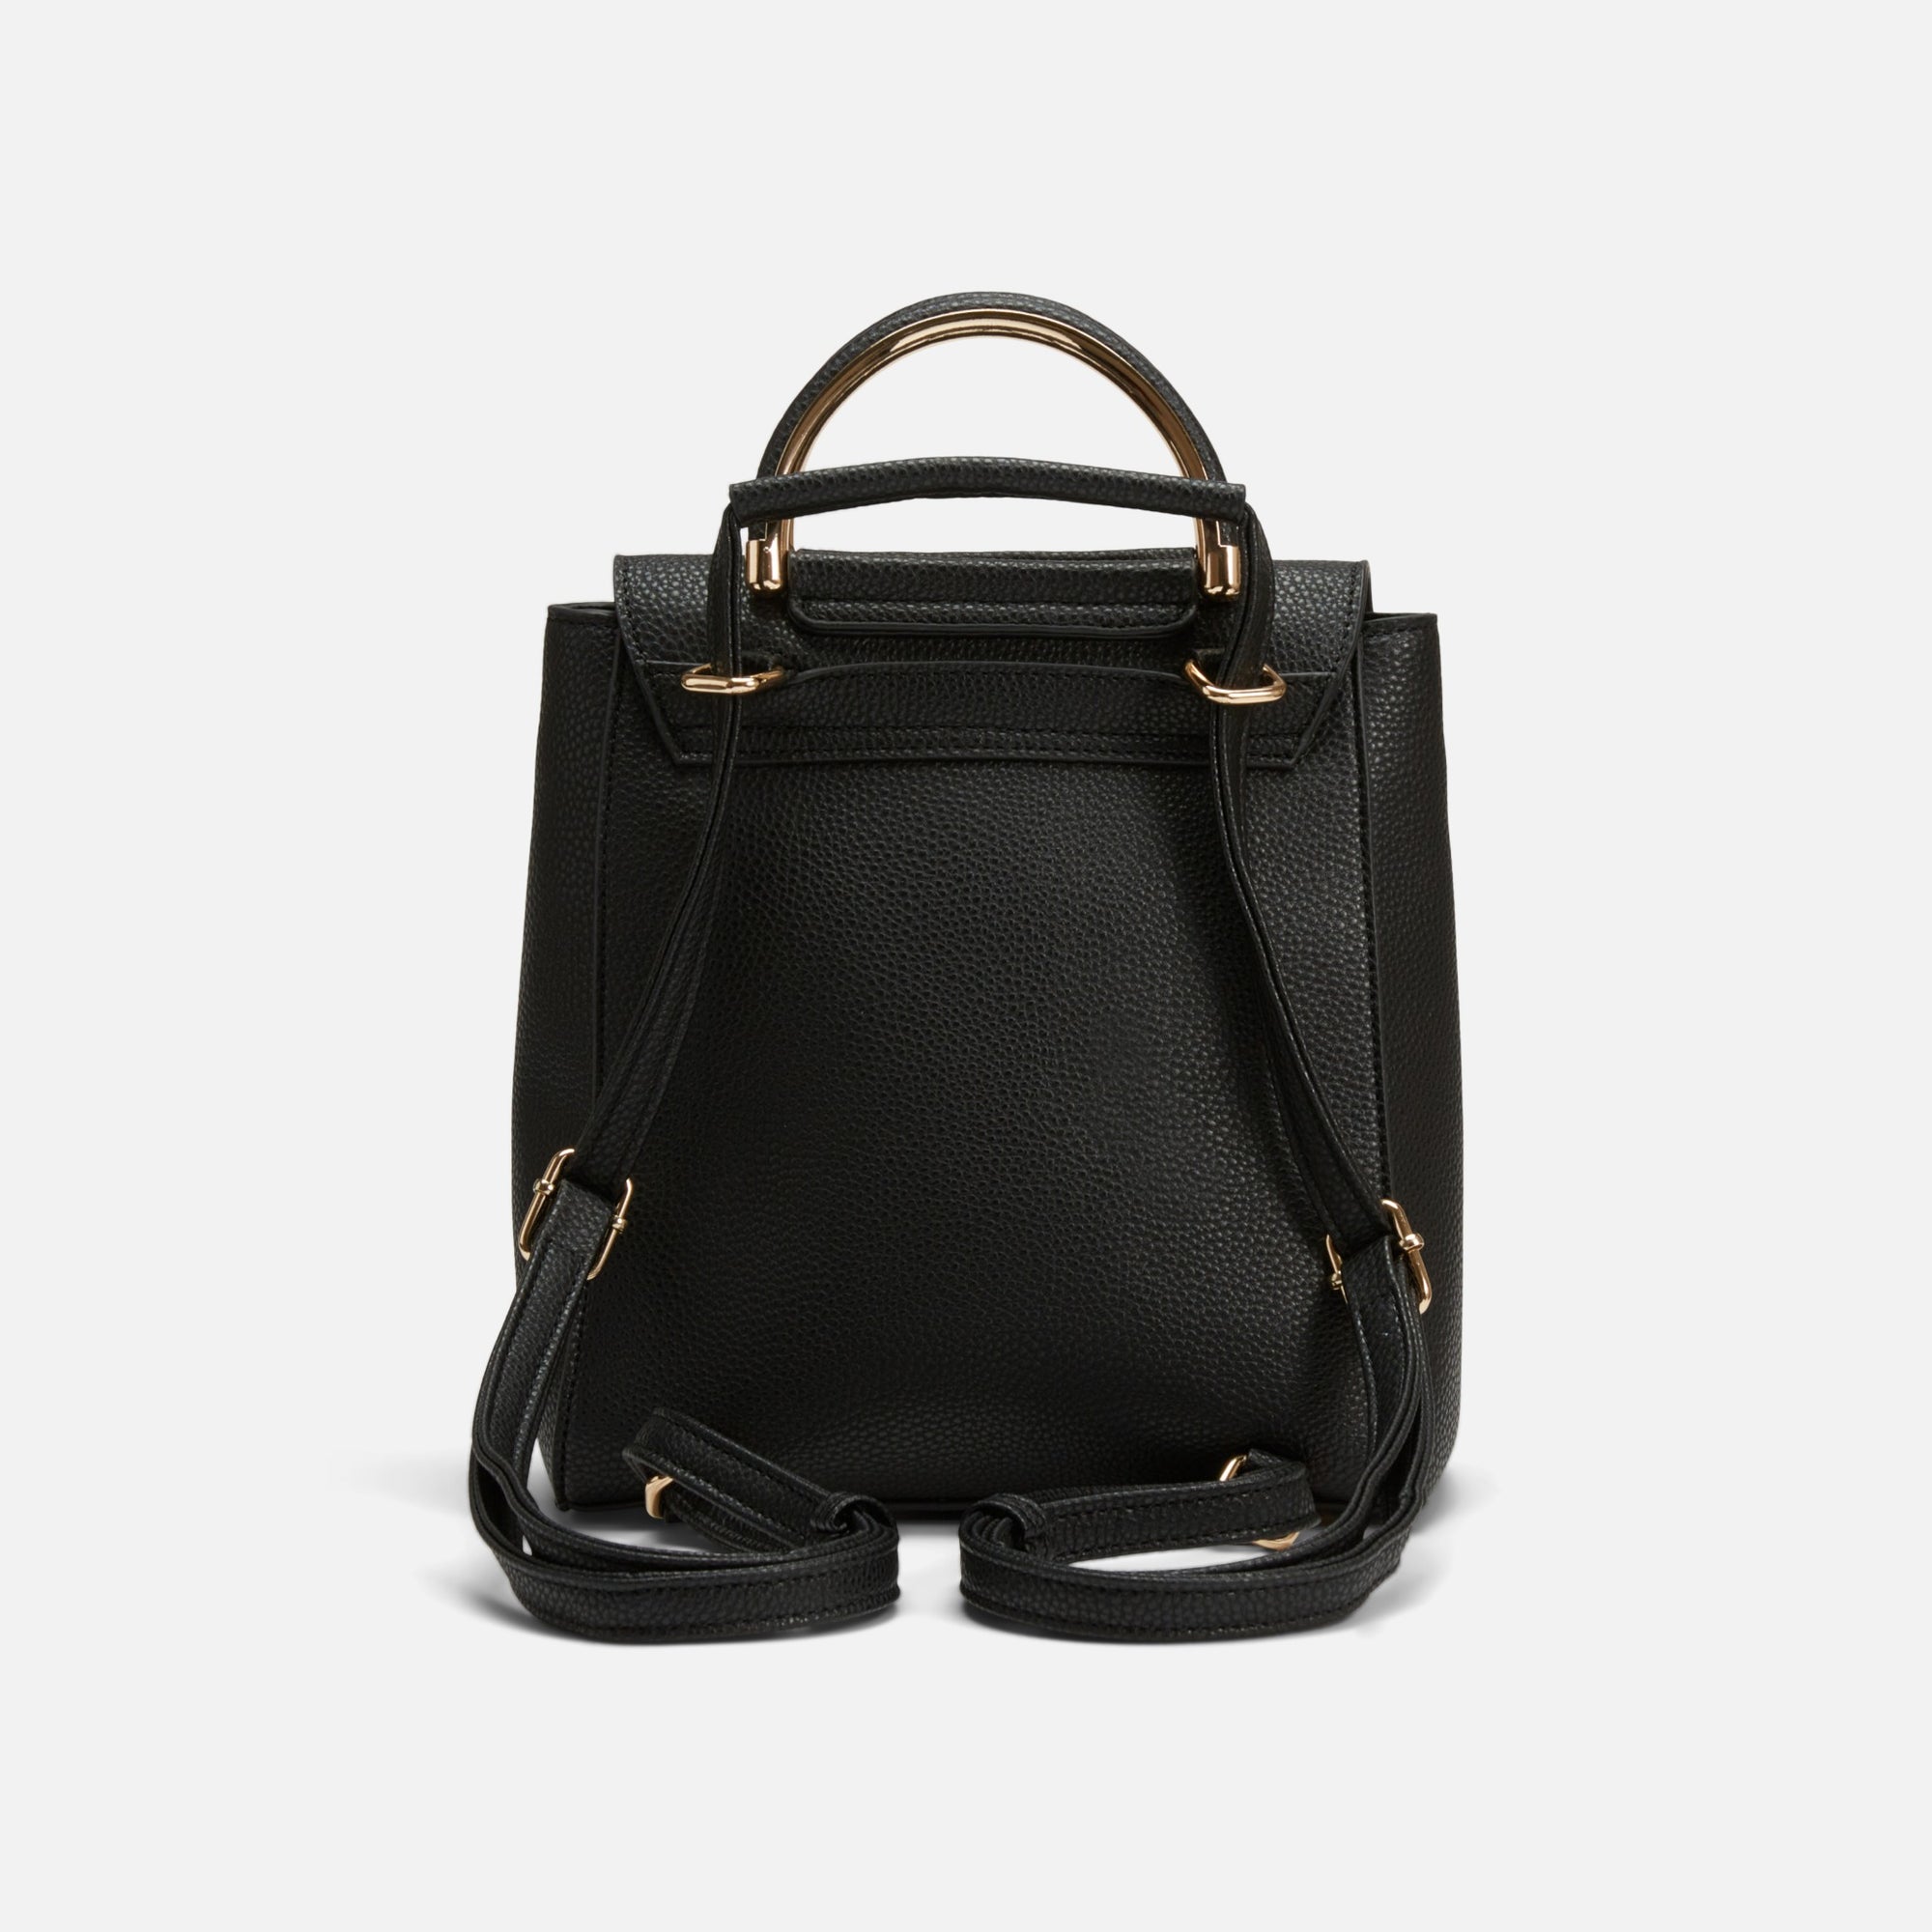 Black backpack with gold handle